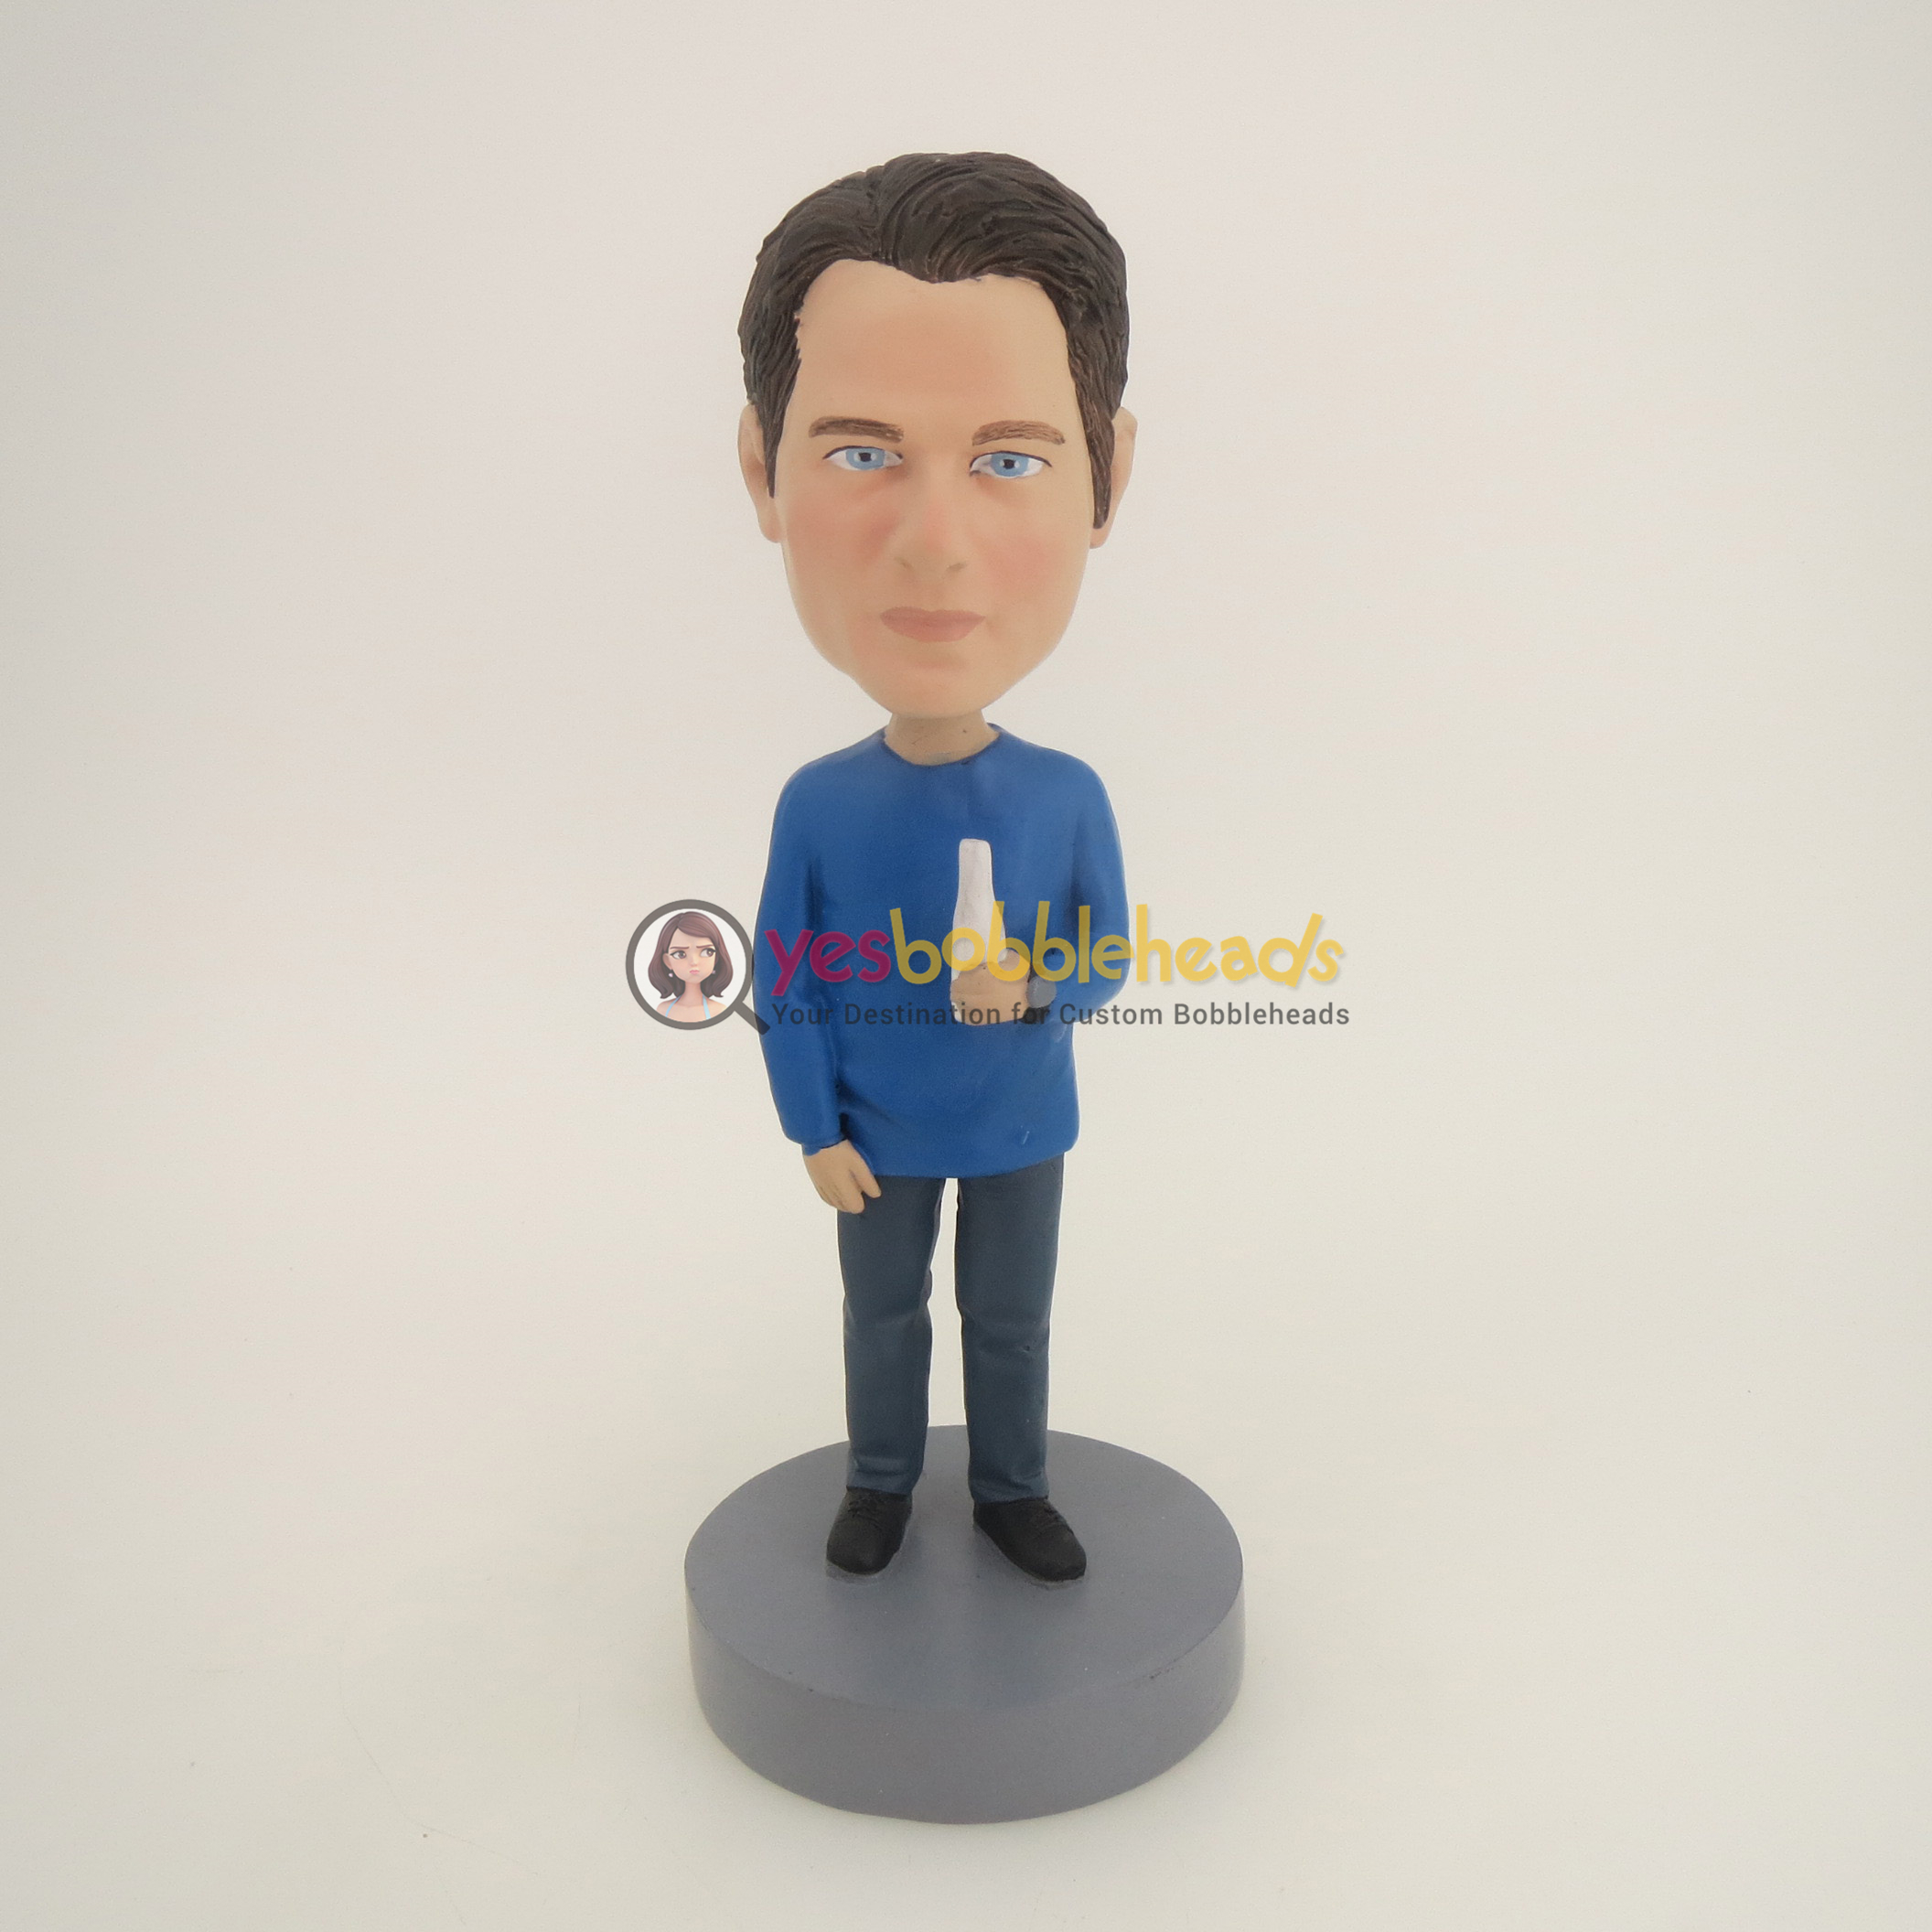 Picture of Custom Bobblehead Doll: Man Holding Some Drink